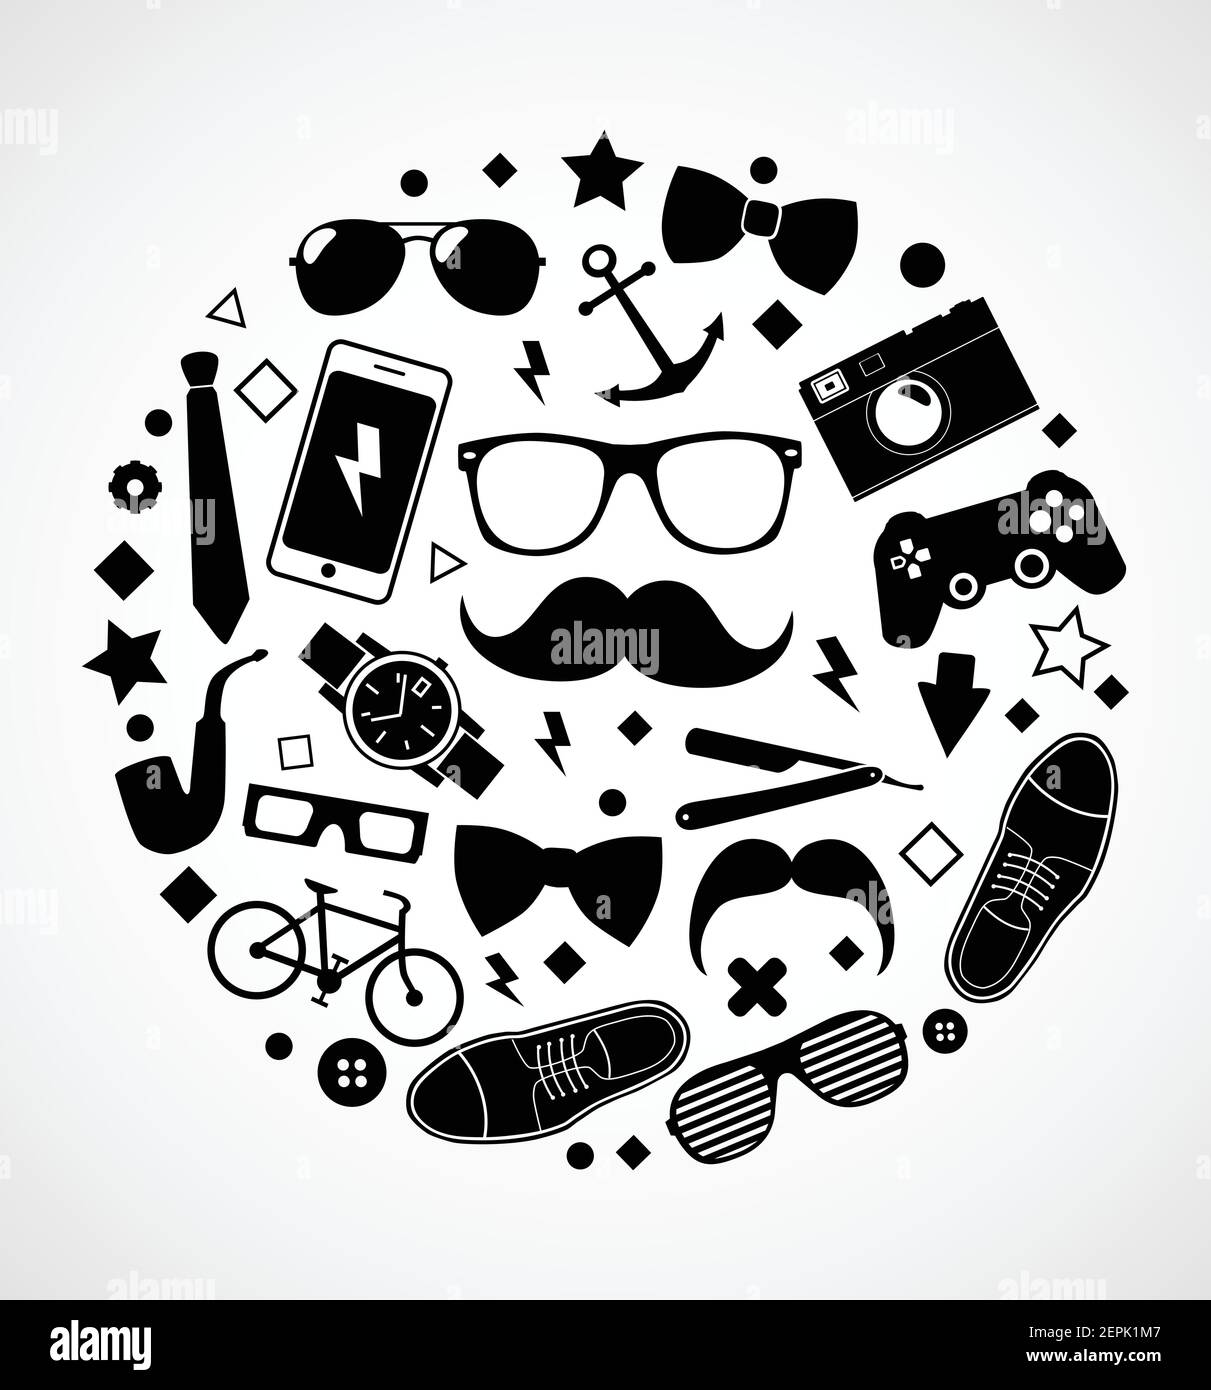 66,409 Mens Accessories Images, Stock Photos, 3D objects